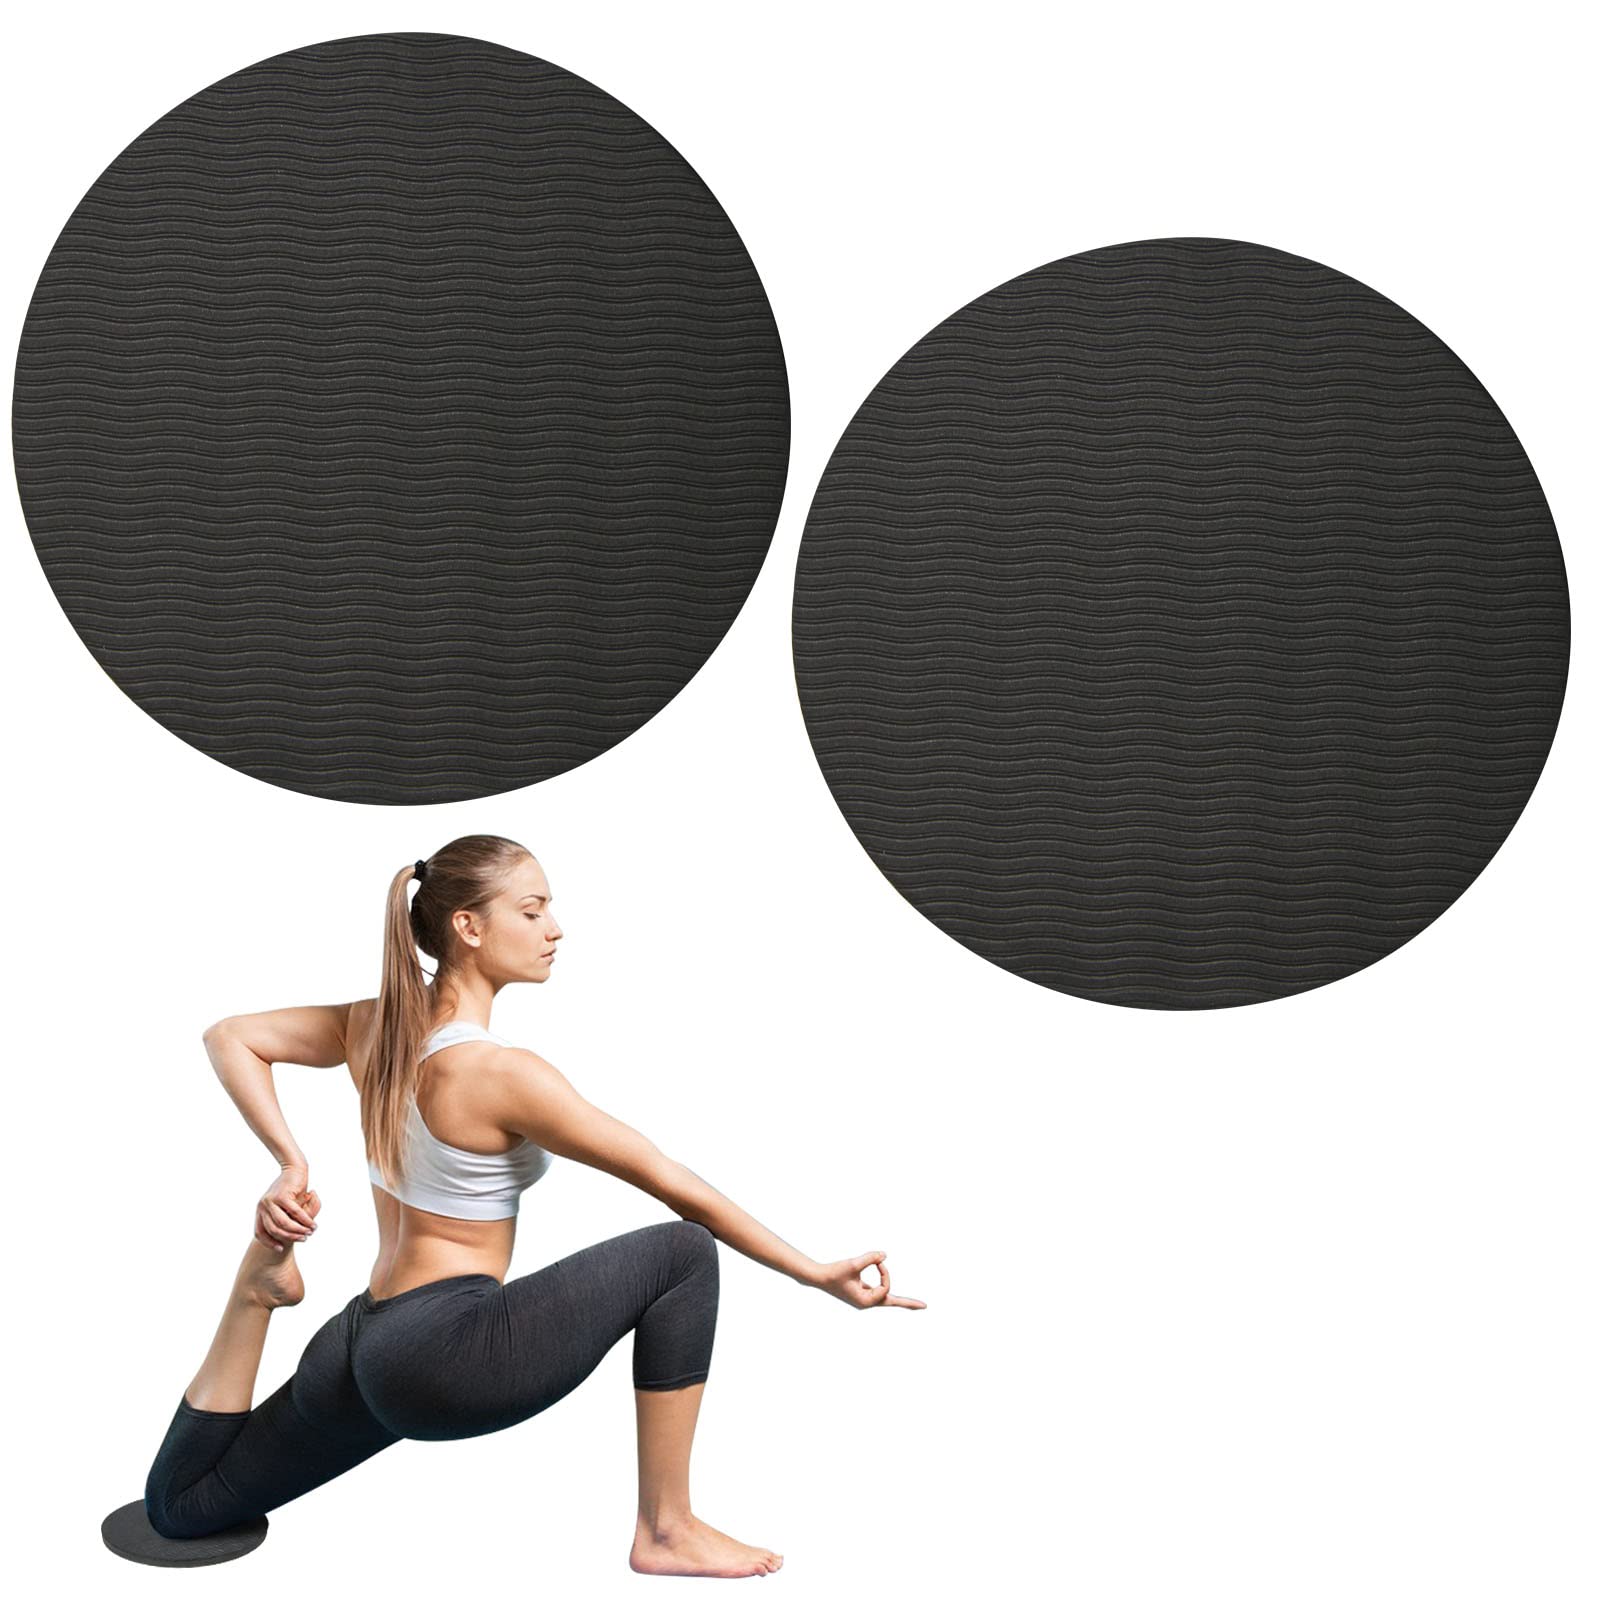 Yoga Knee Pads 1 Pack, Yoga Knee Cushion Thick Exercise Pads for Knees  Elbows Wrist Hands Head Foam Pilates Kneeling pad